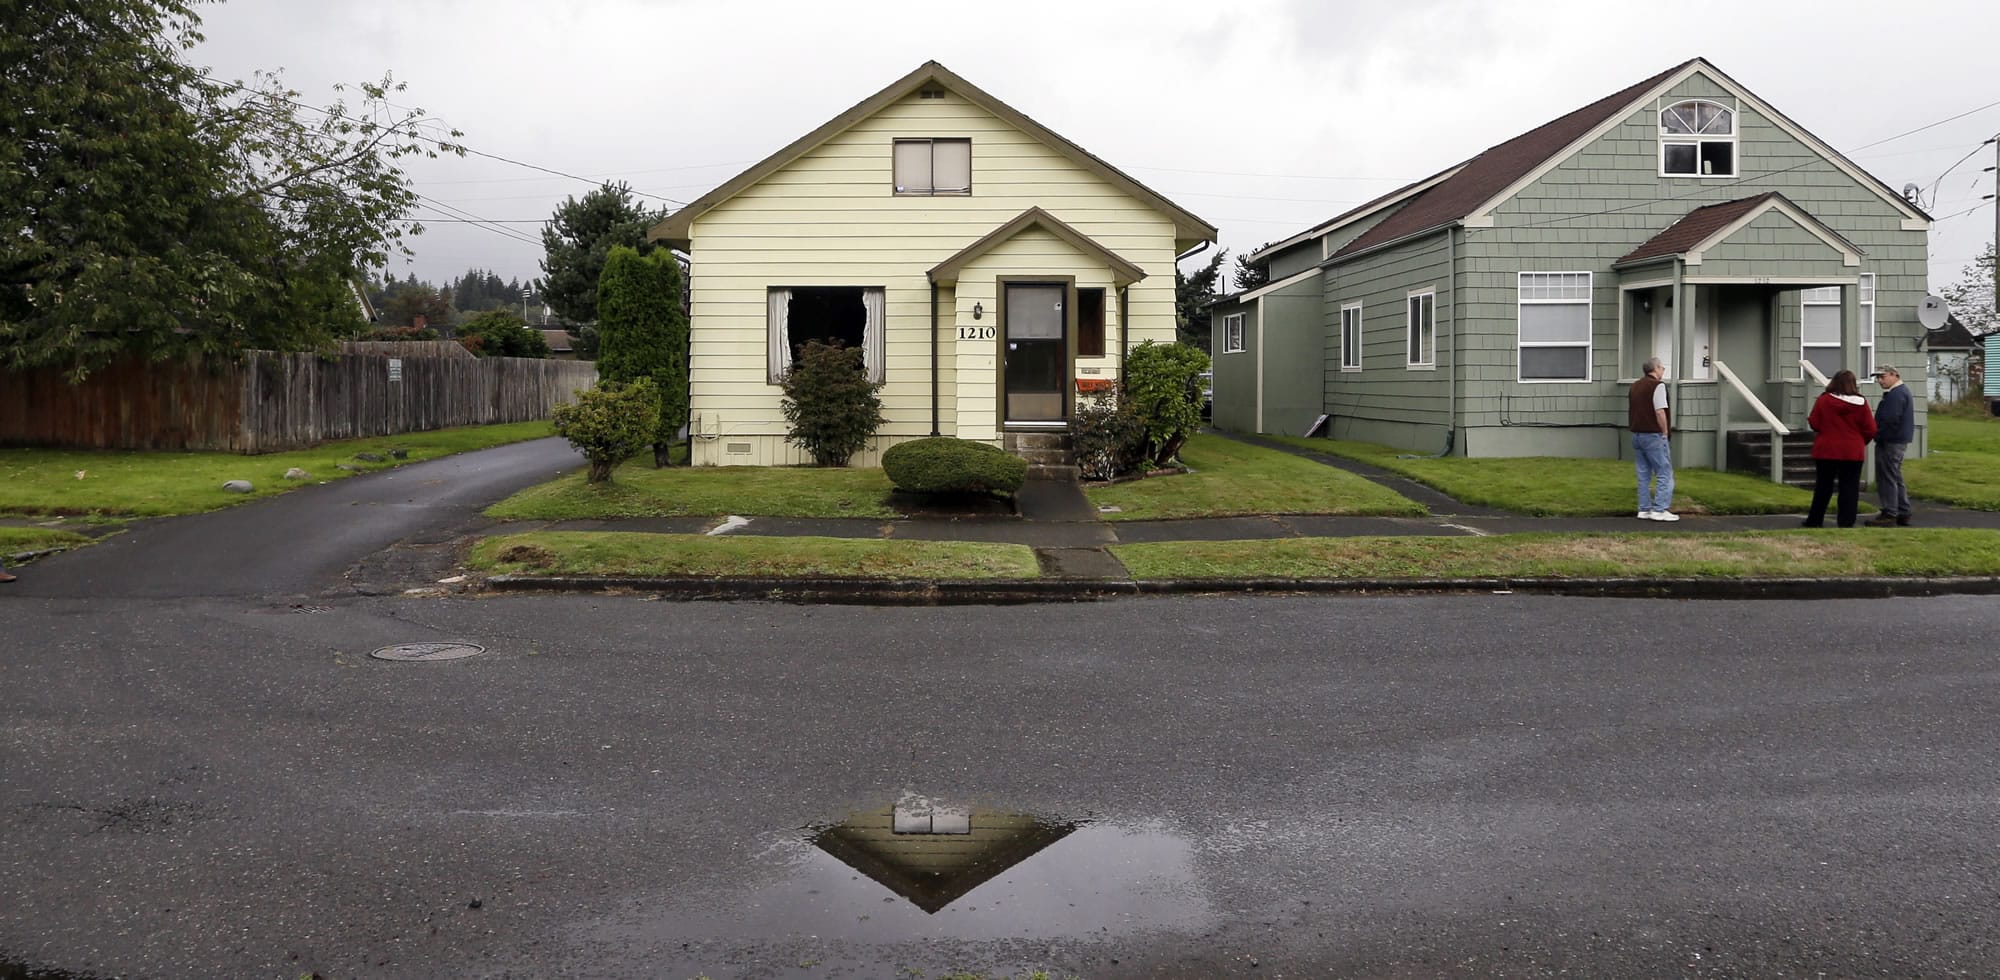 The childhood home of Kurt Cobain, the late frontman of Nirvana, left, is shown Monday along an alley in Aberdeen. Cobain's mother is putting the 1.5-story Aberdeen bungalow on the market this week, the same month as the 20th anniversary of Nirvana's final studio album. The home, last assessed at less than $67,000, is being listed for $500,000, but the family would also be happy entering into a partnership with anyone who wants to turn it into a museum.